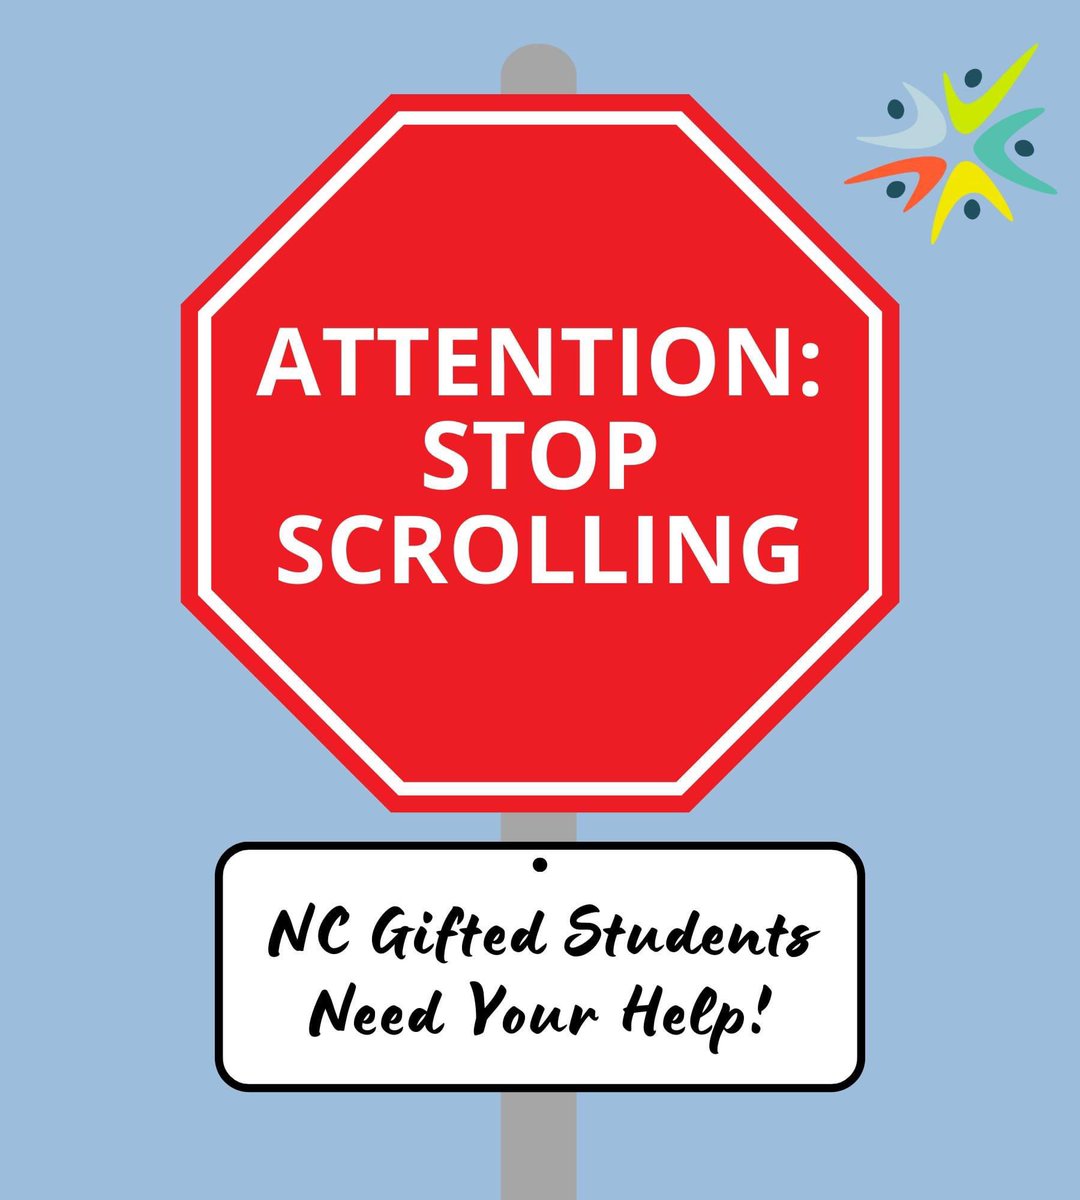 New NC education legislation (HB 259) is being voted on that covers many educational issues, including drastic changes to gifted & talented programming and cuts to funding. Action across the state is needed NOW! See our blog at the link below for more info ncagt.org/post/proposed-…